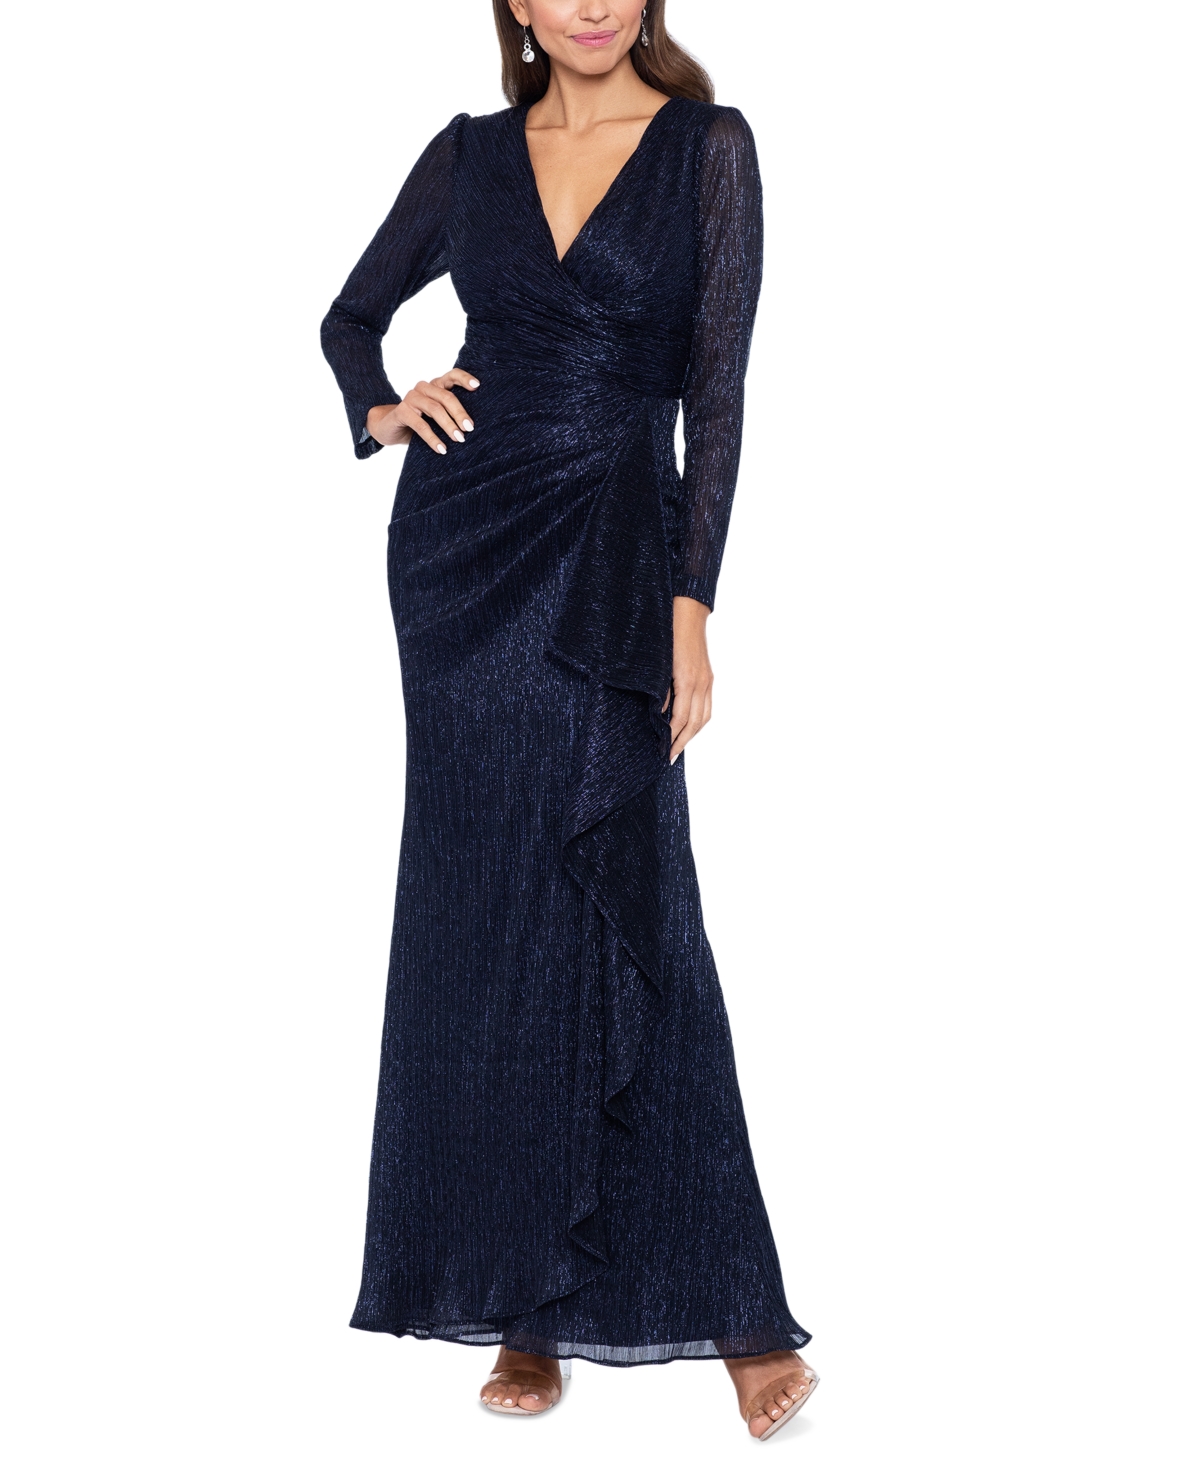 Women's Metallic Ruched Gown - Navy/royal